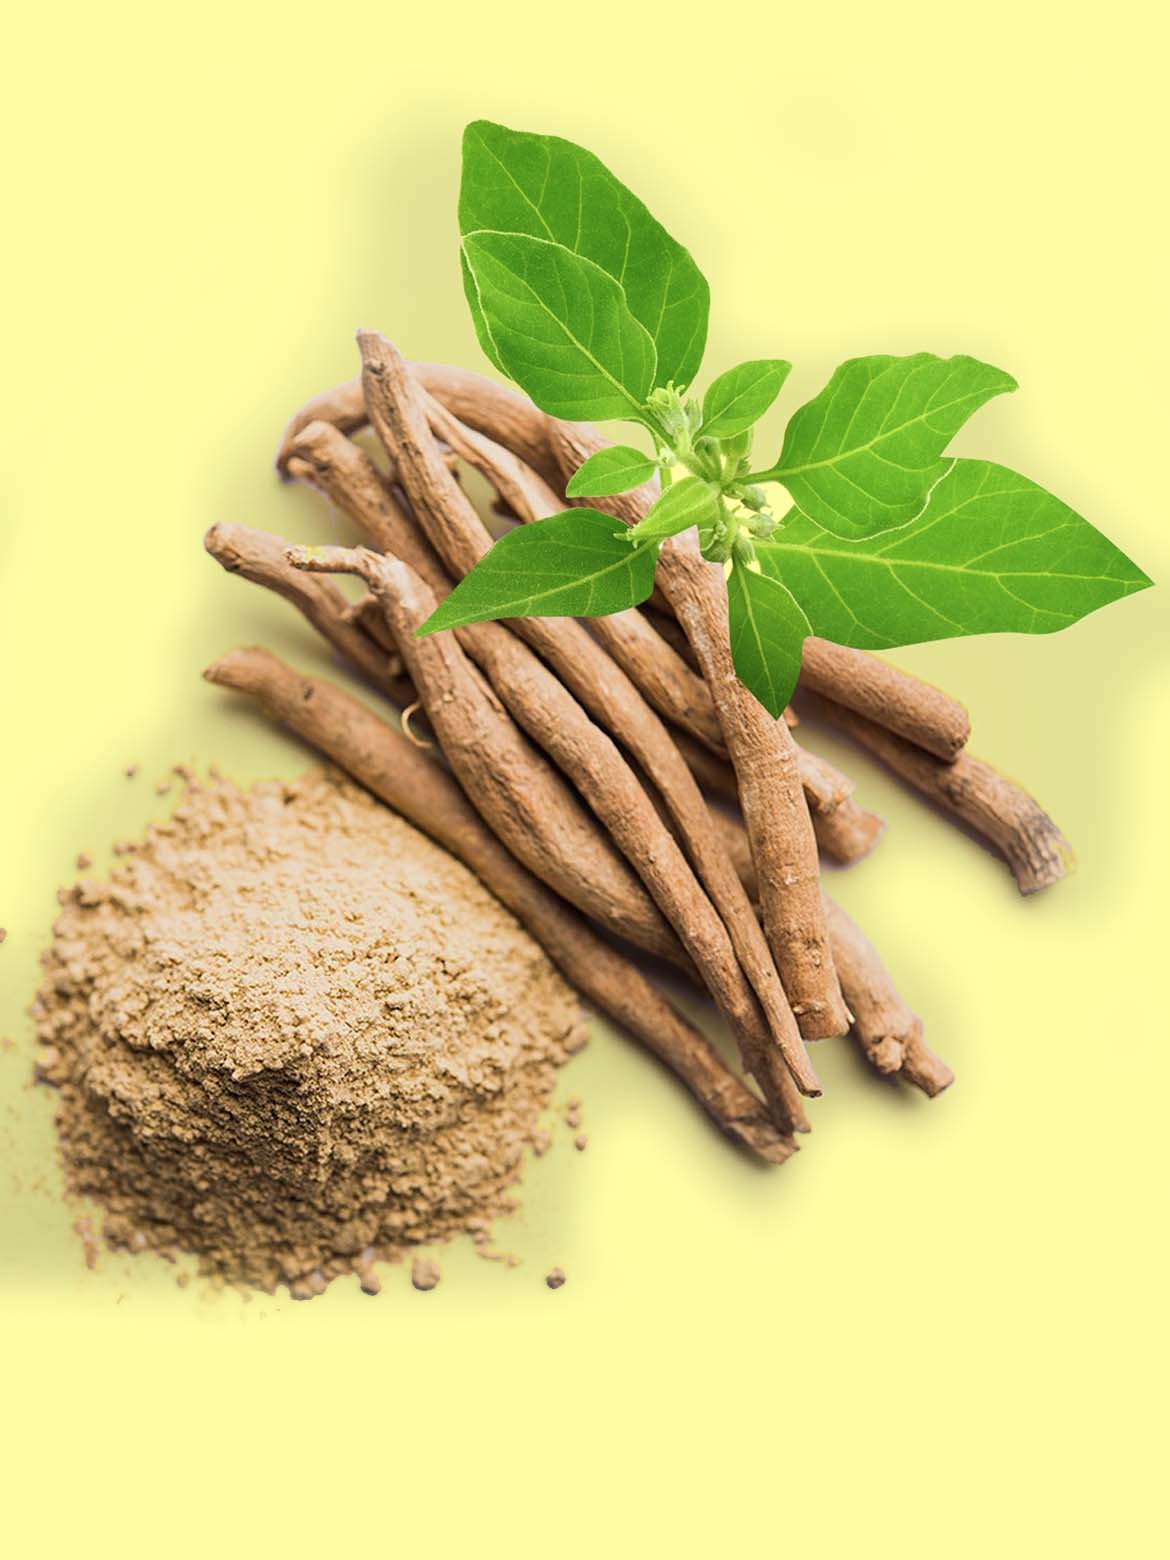 Ashwagandha – One of the most important herbs in Ayurveda